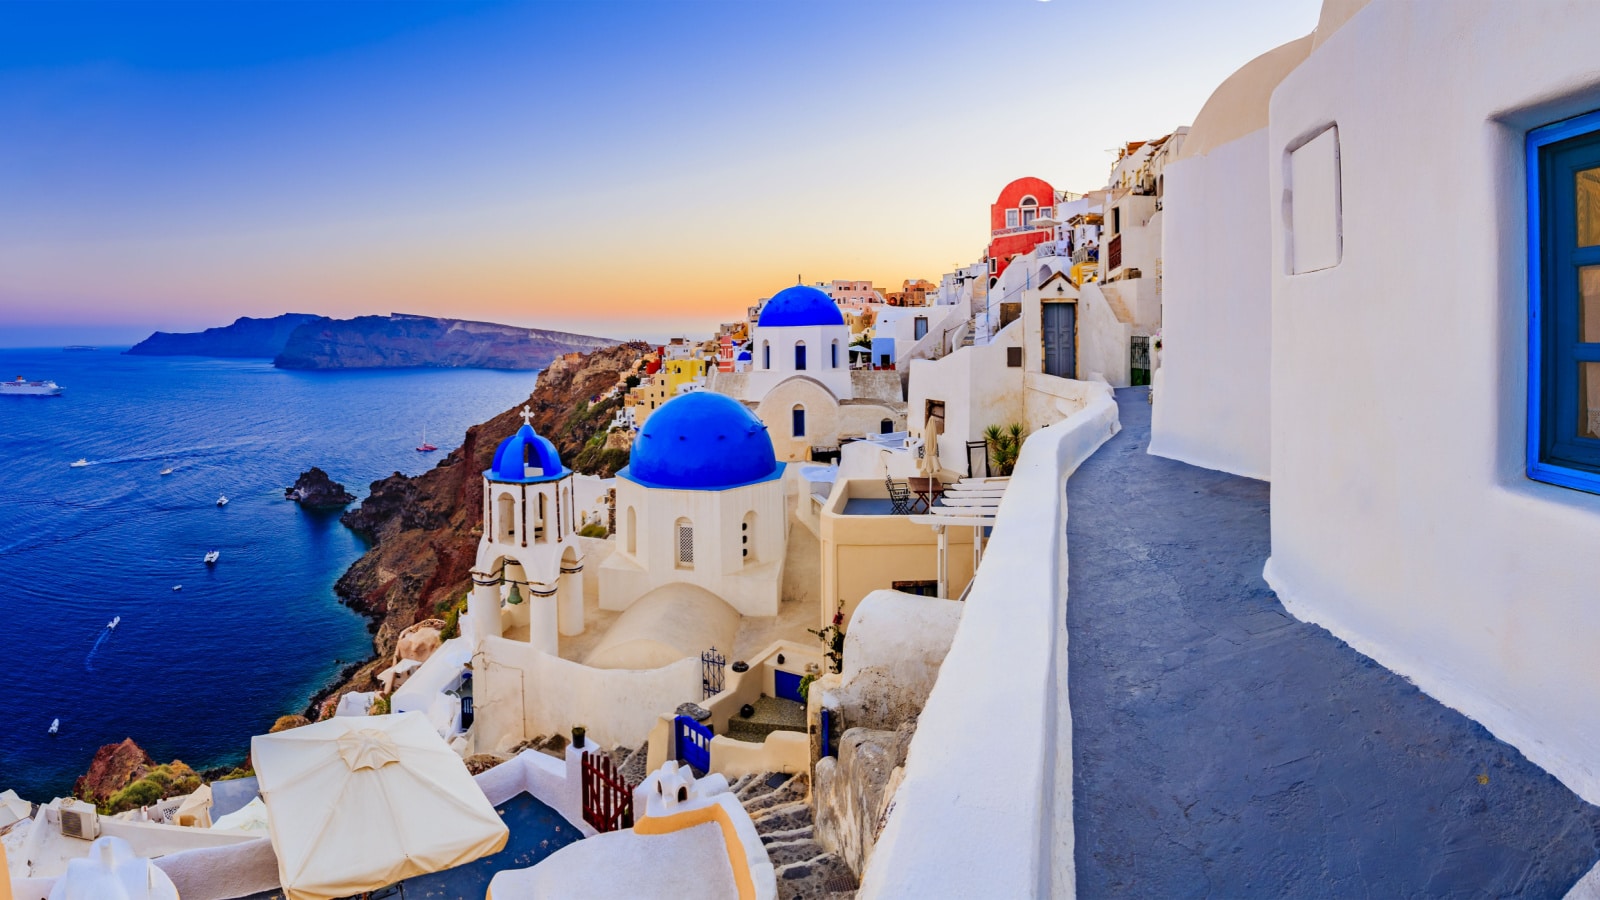 Amazing sunset view with white houses in Oia village on Santorini island in Greece.